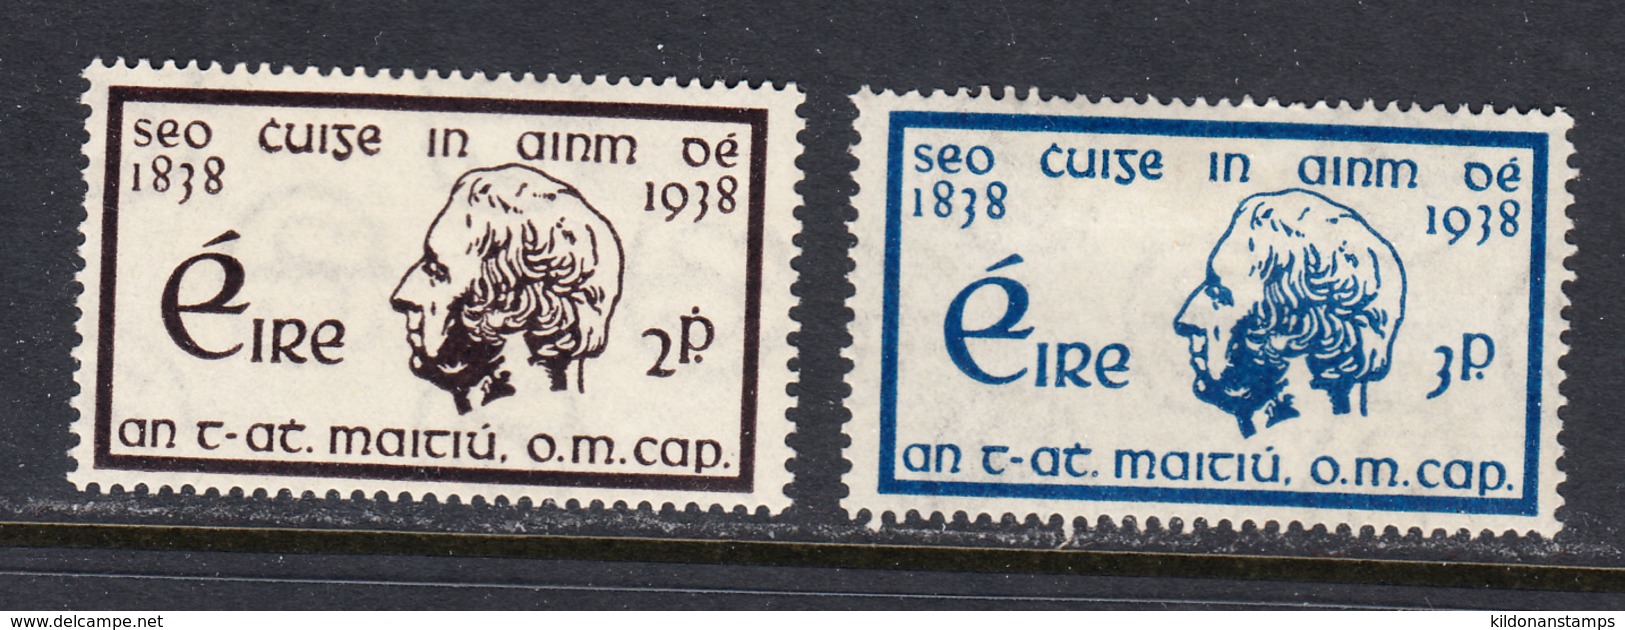 Ireland 1938 Mint Mounted Sc# 101-102, SG 107-108 - Unused Stamps